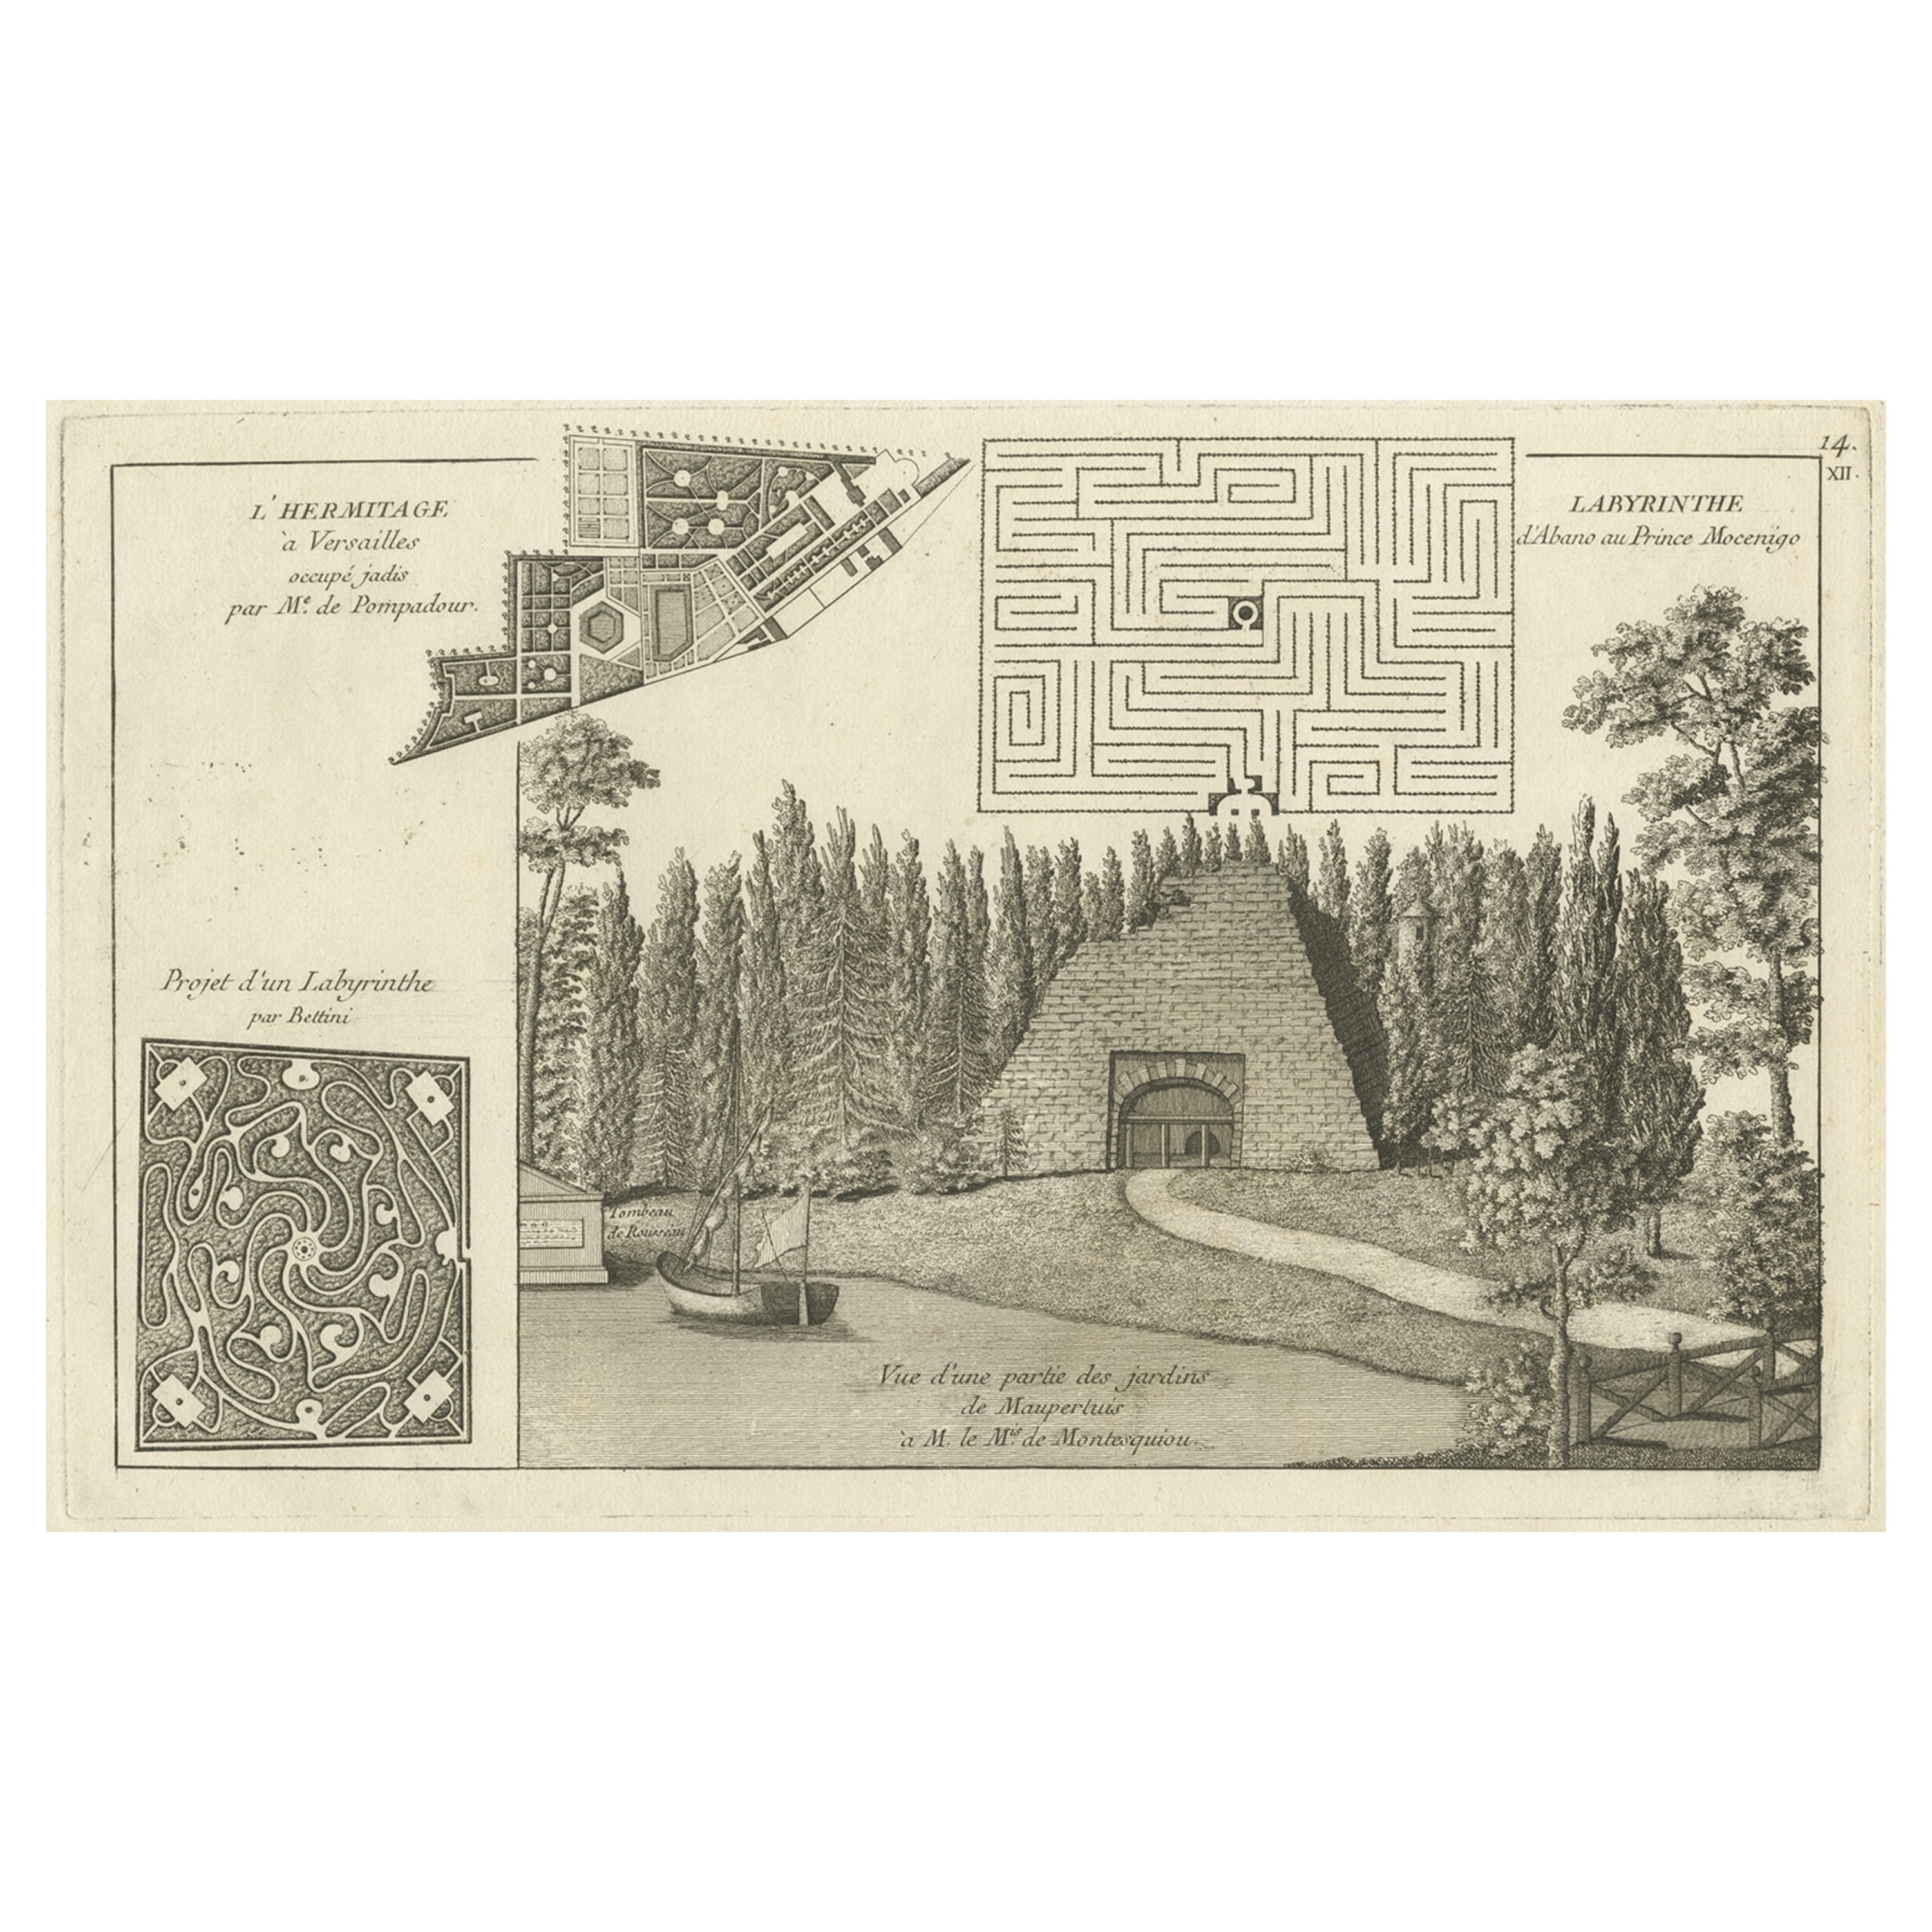 Antique Print of Labyrinth and the Hermitage of Versailles, France, 1776